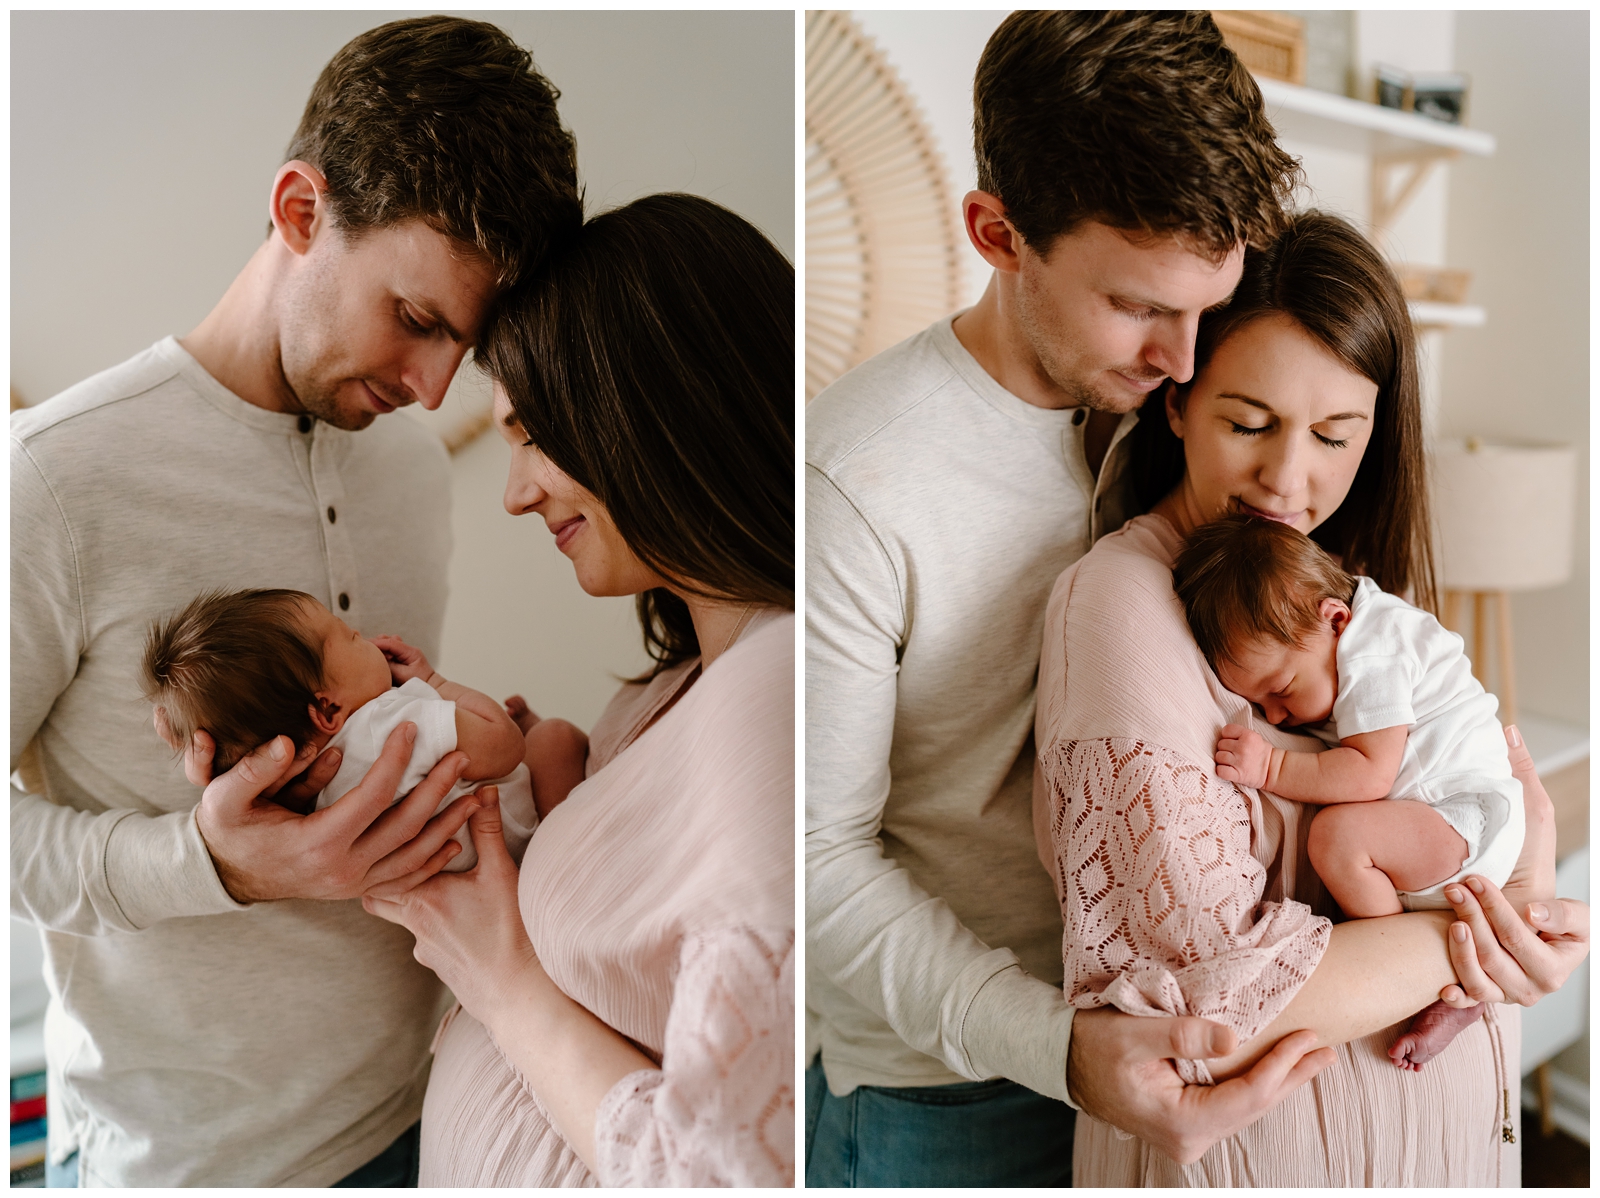 Mom and dad cuddle baby at their in-home newborn session in the Triad area of NC